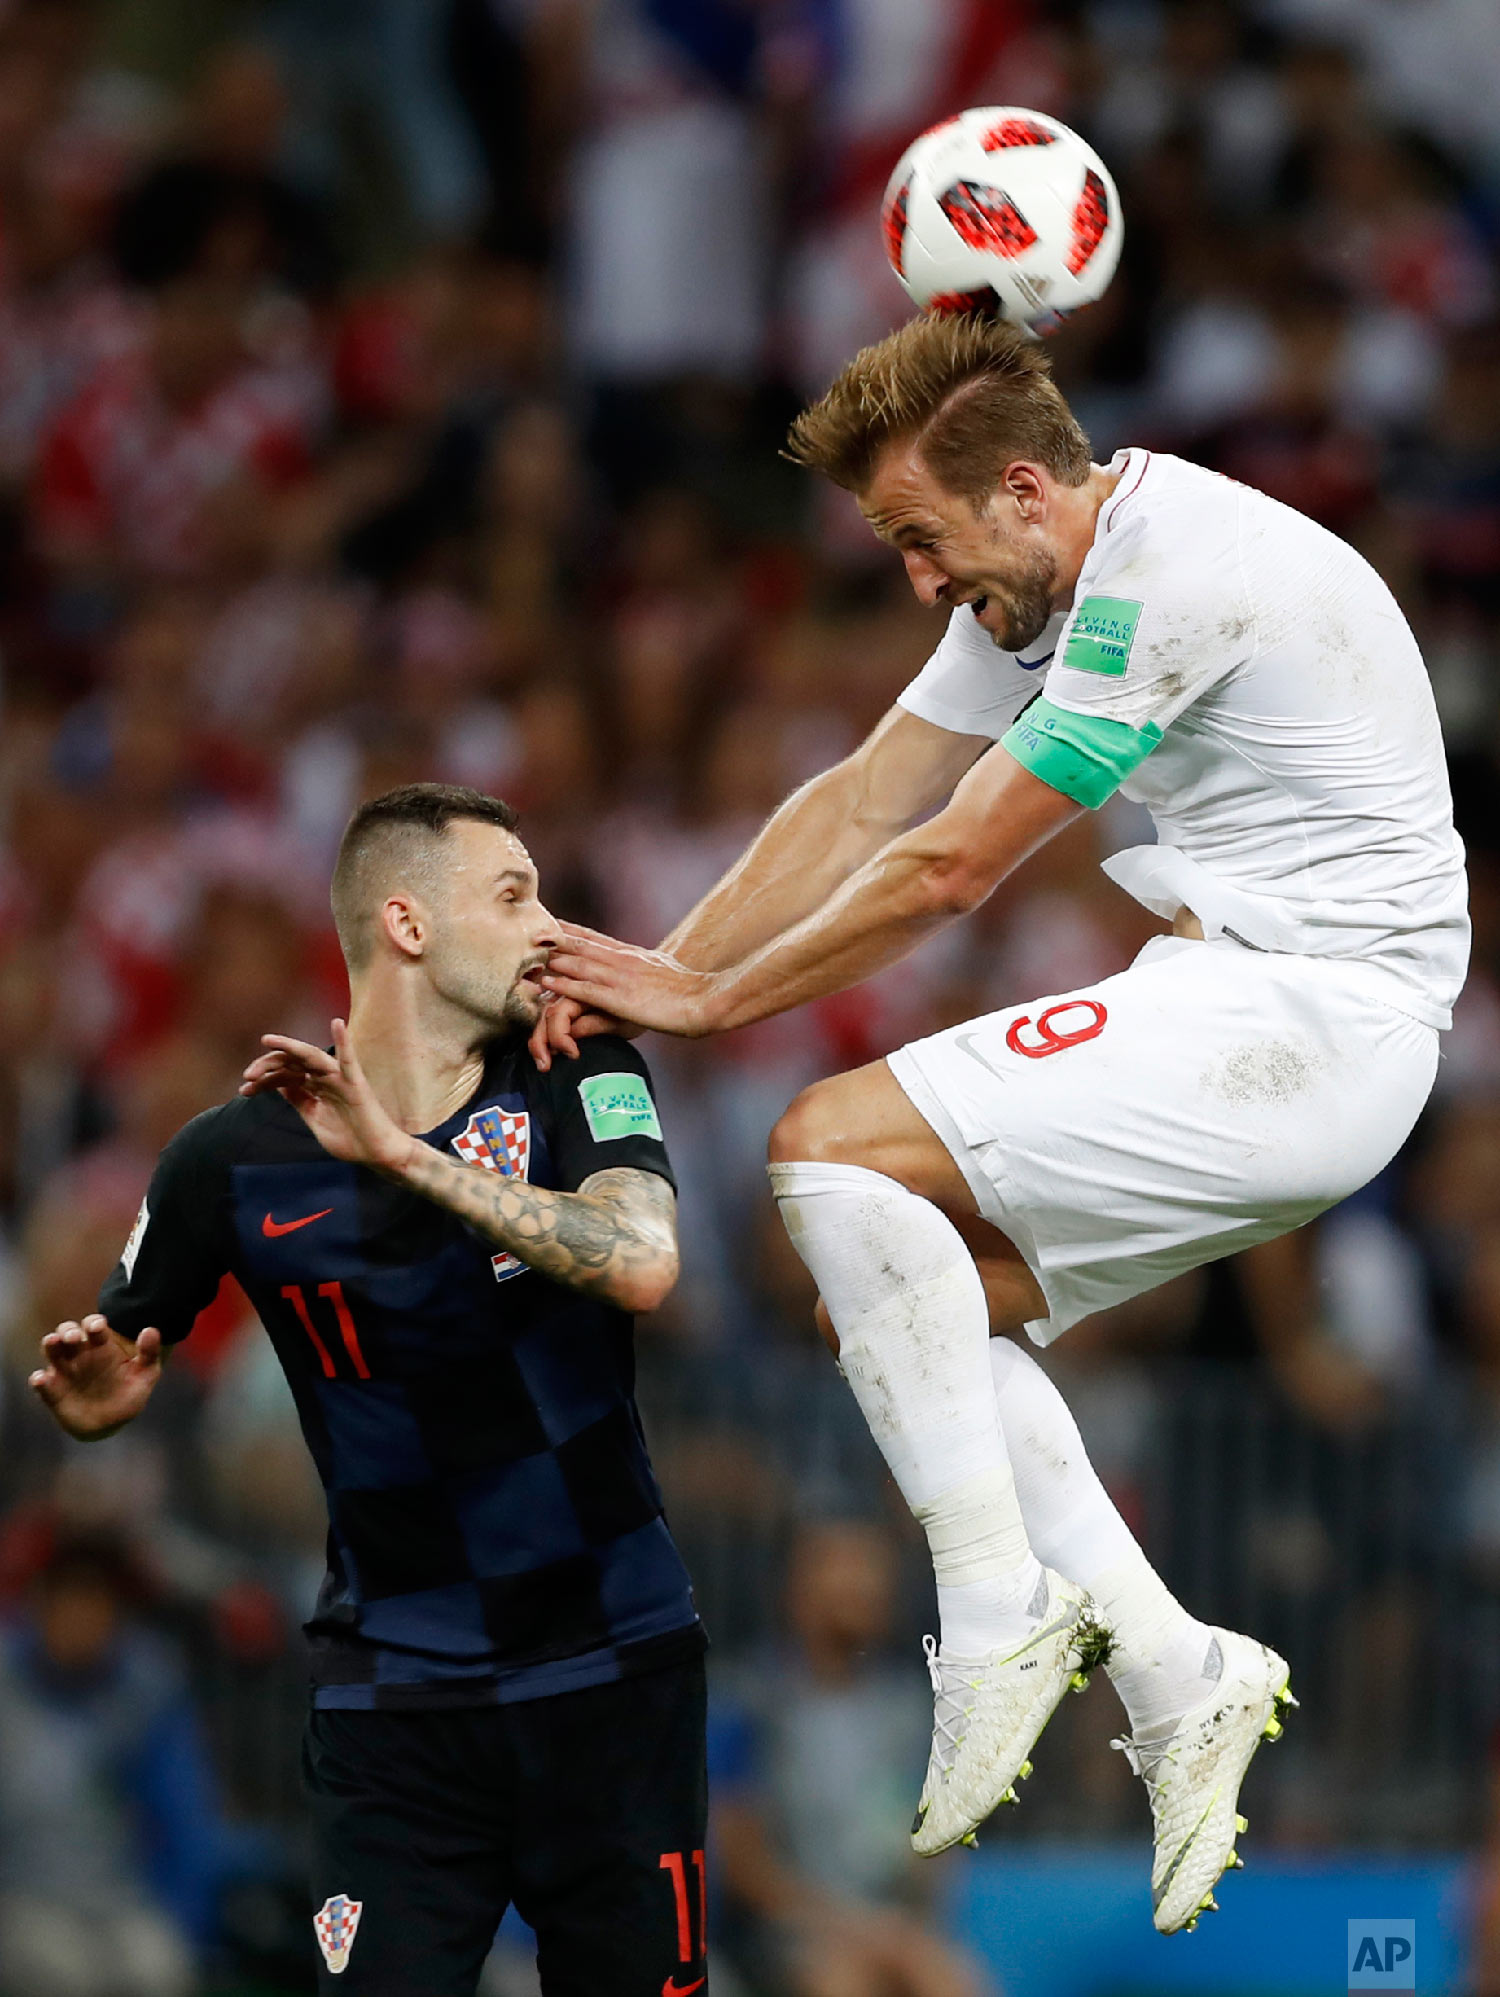  England's Harry Kane, right, challenges for the ball Croatia's Marcelo Brozovic, left, during the semifinal match between Croatia and England at the 2018 soccer World Cup in the Luzhniki Stadium in Moscow, Russia, Wednesday, July 11, 2018. (AP Photo